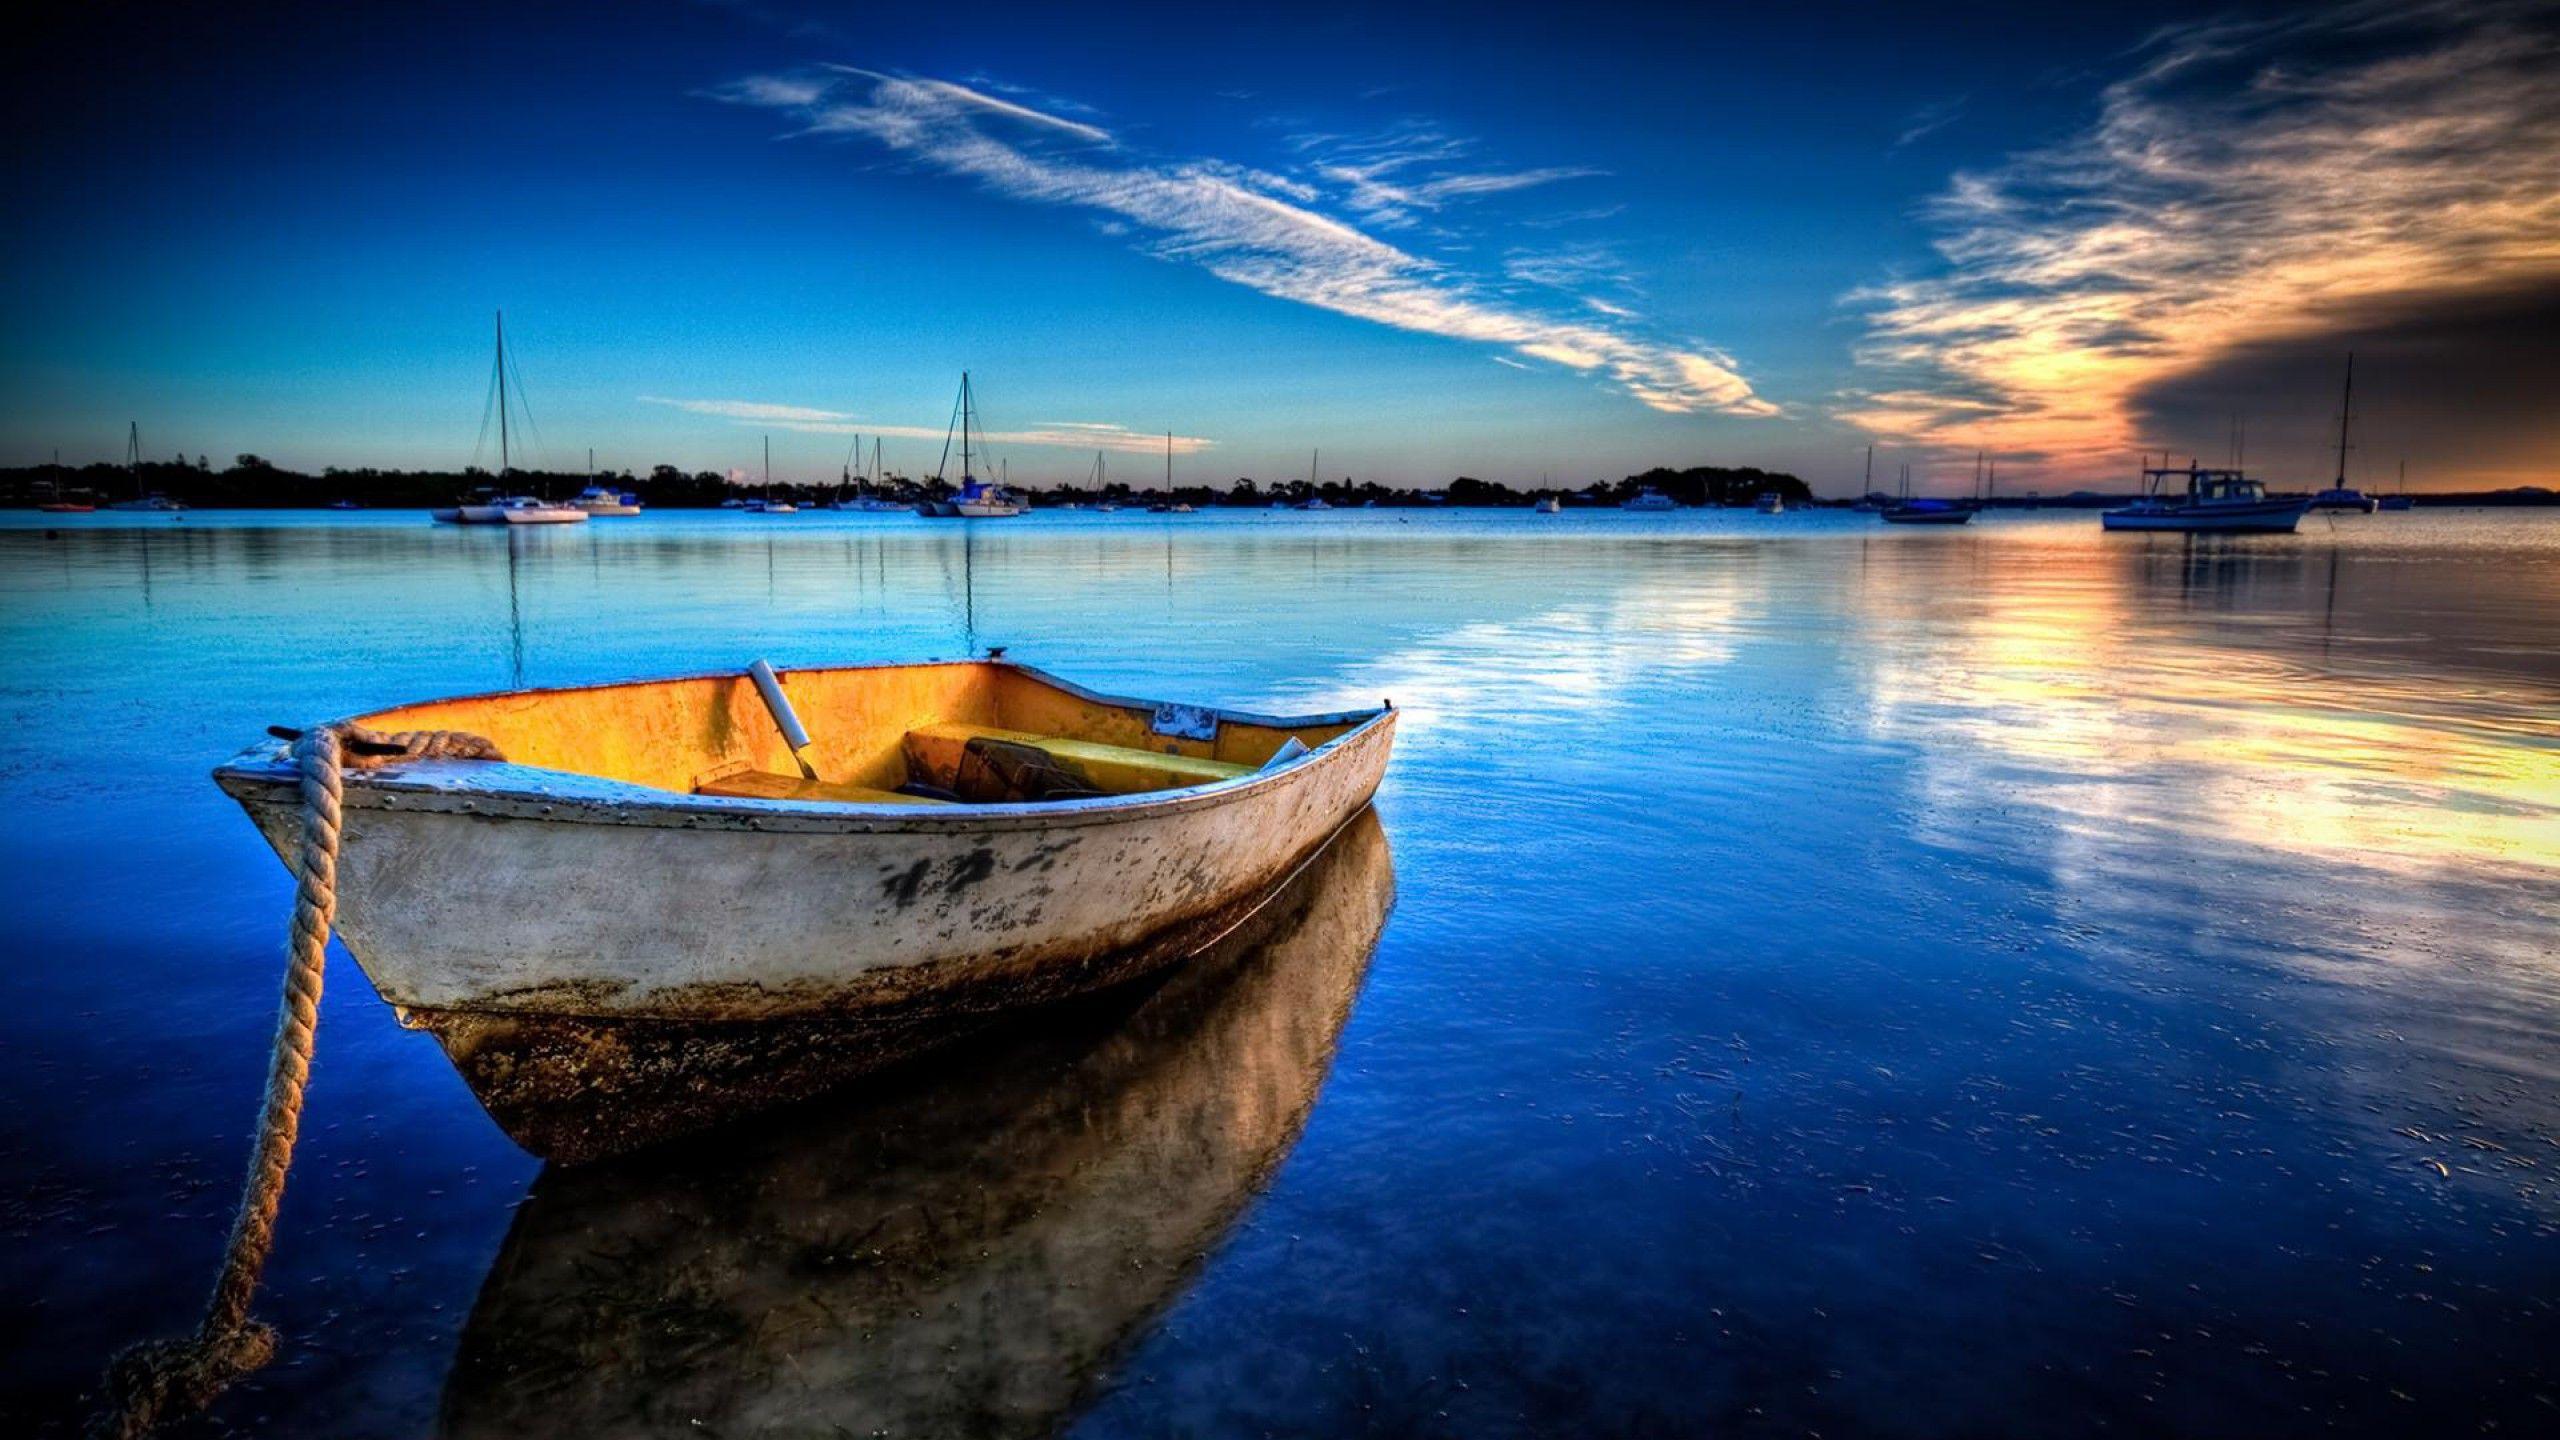 Best 56+ Boat Wallpapers on HipWallpapers